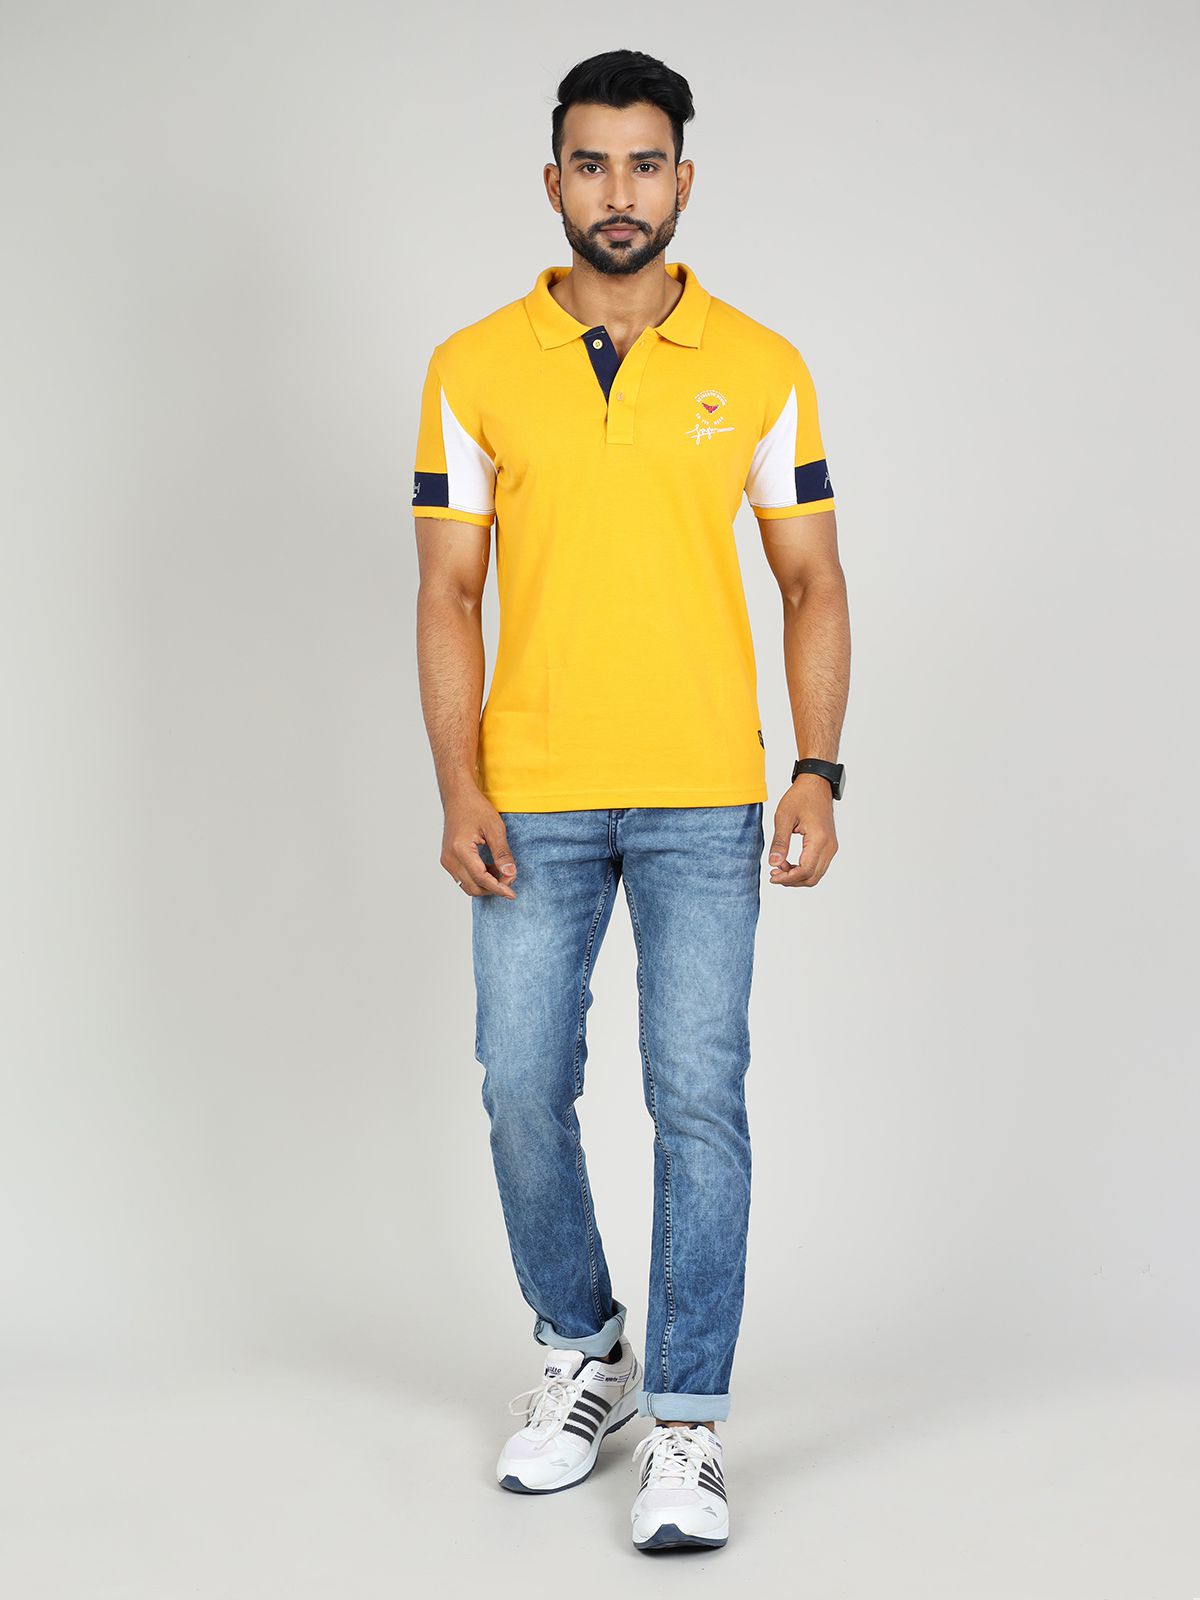     			GAME BEGINS Cotton Slim Fit Colorblock Half Sleeves Men's Polo T Shirt - Yellow ( Pack of 1 )